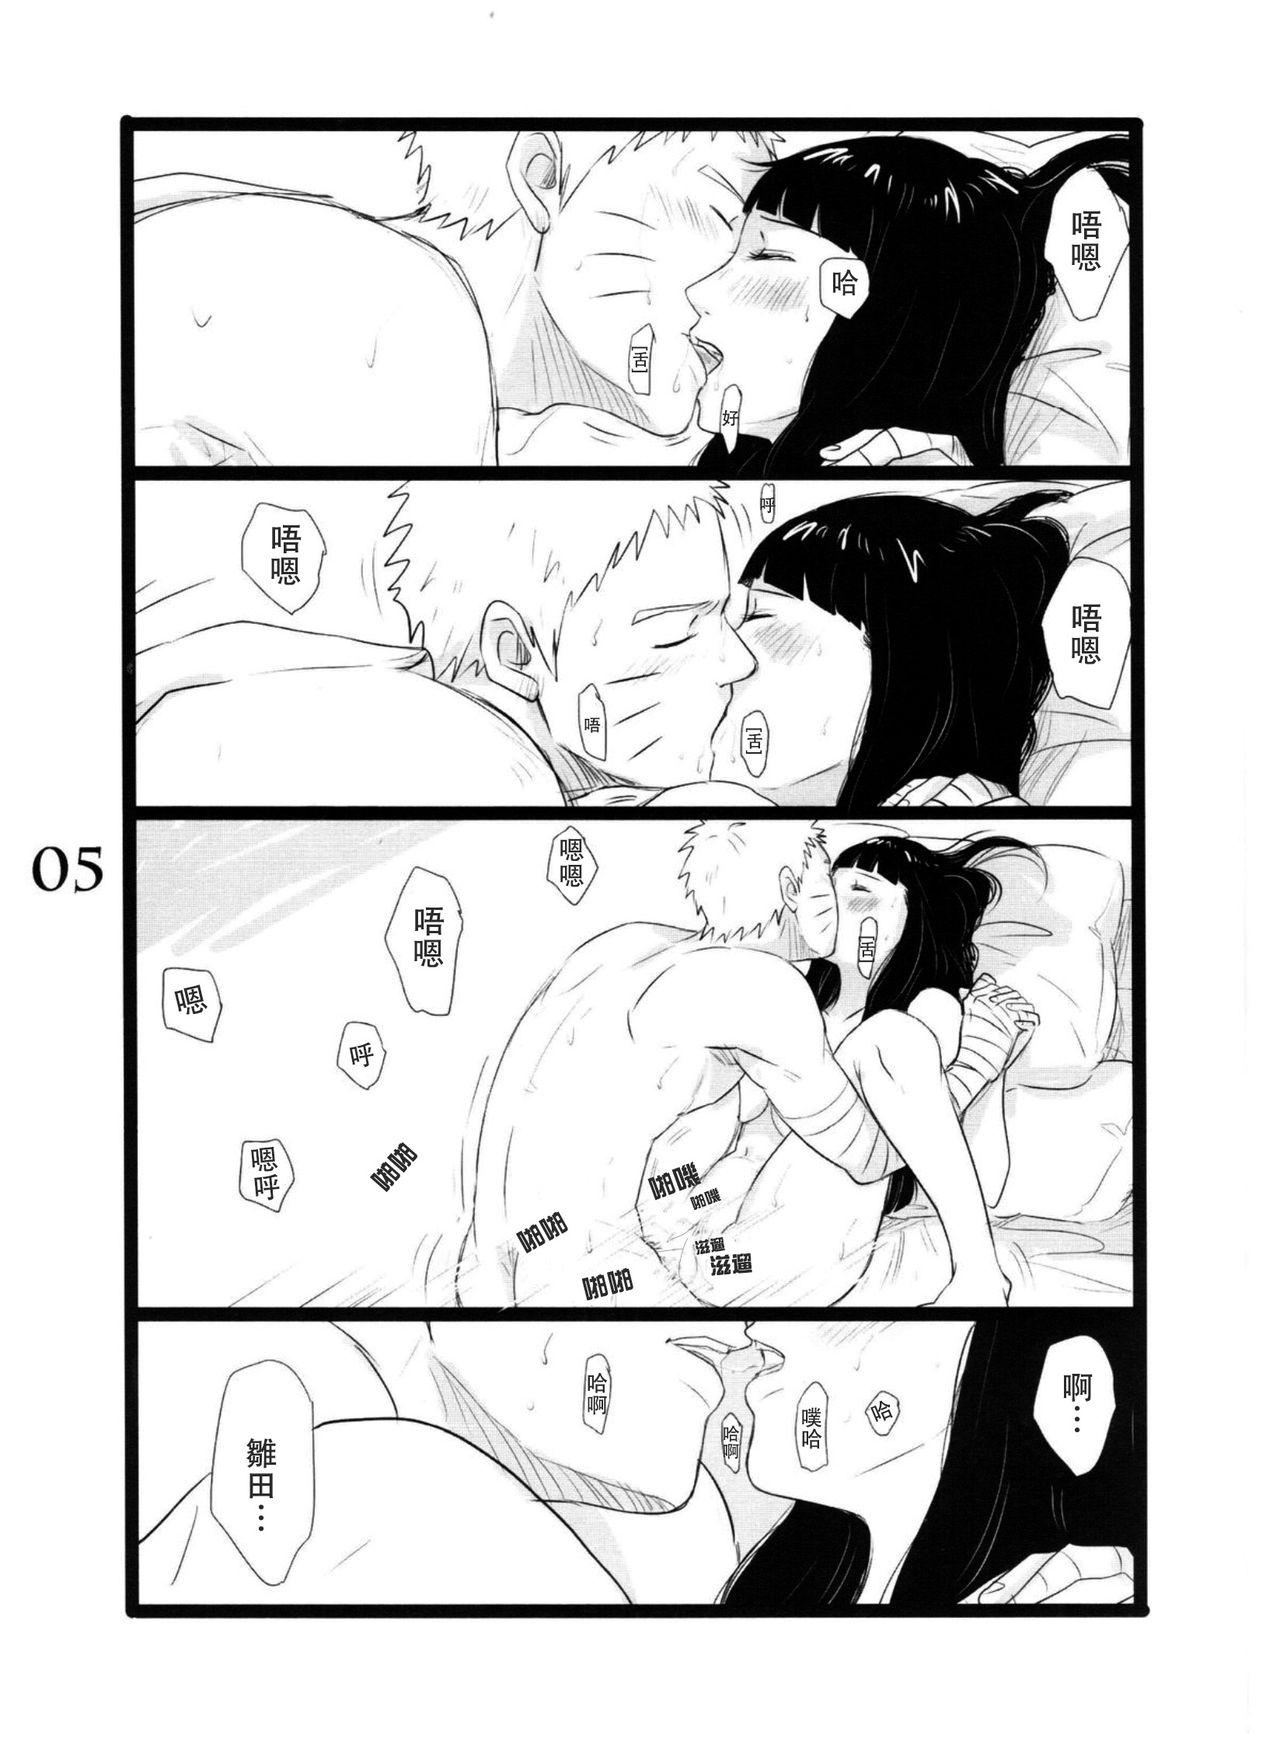 (C88) [blink (shimoyake)] YOUR MY SWEET - I LOVE YOU DARLING (Naruto) [Chinese] [沒有漢化] page 6 full